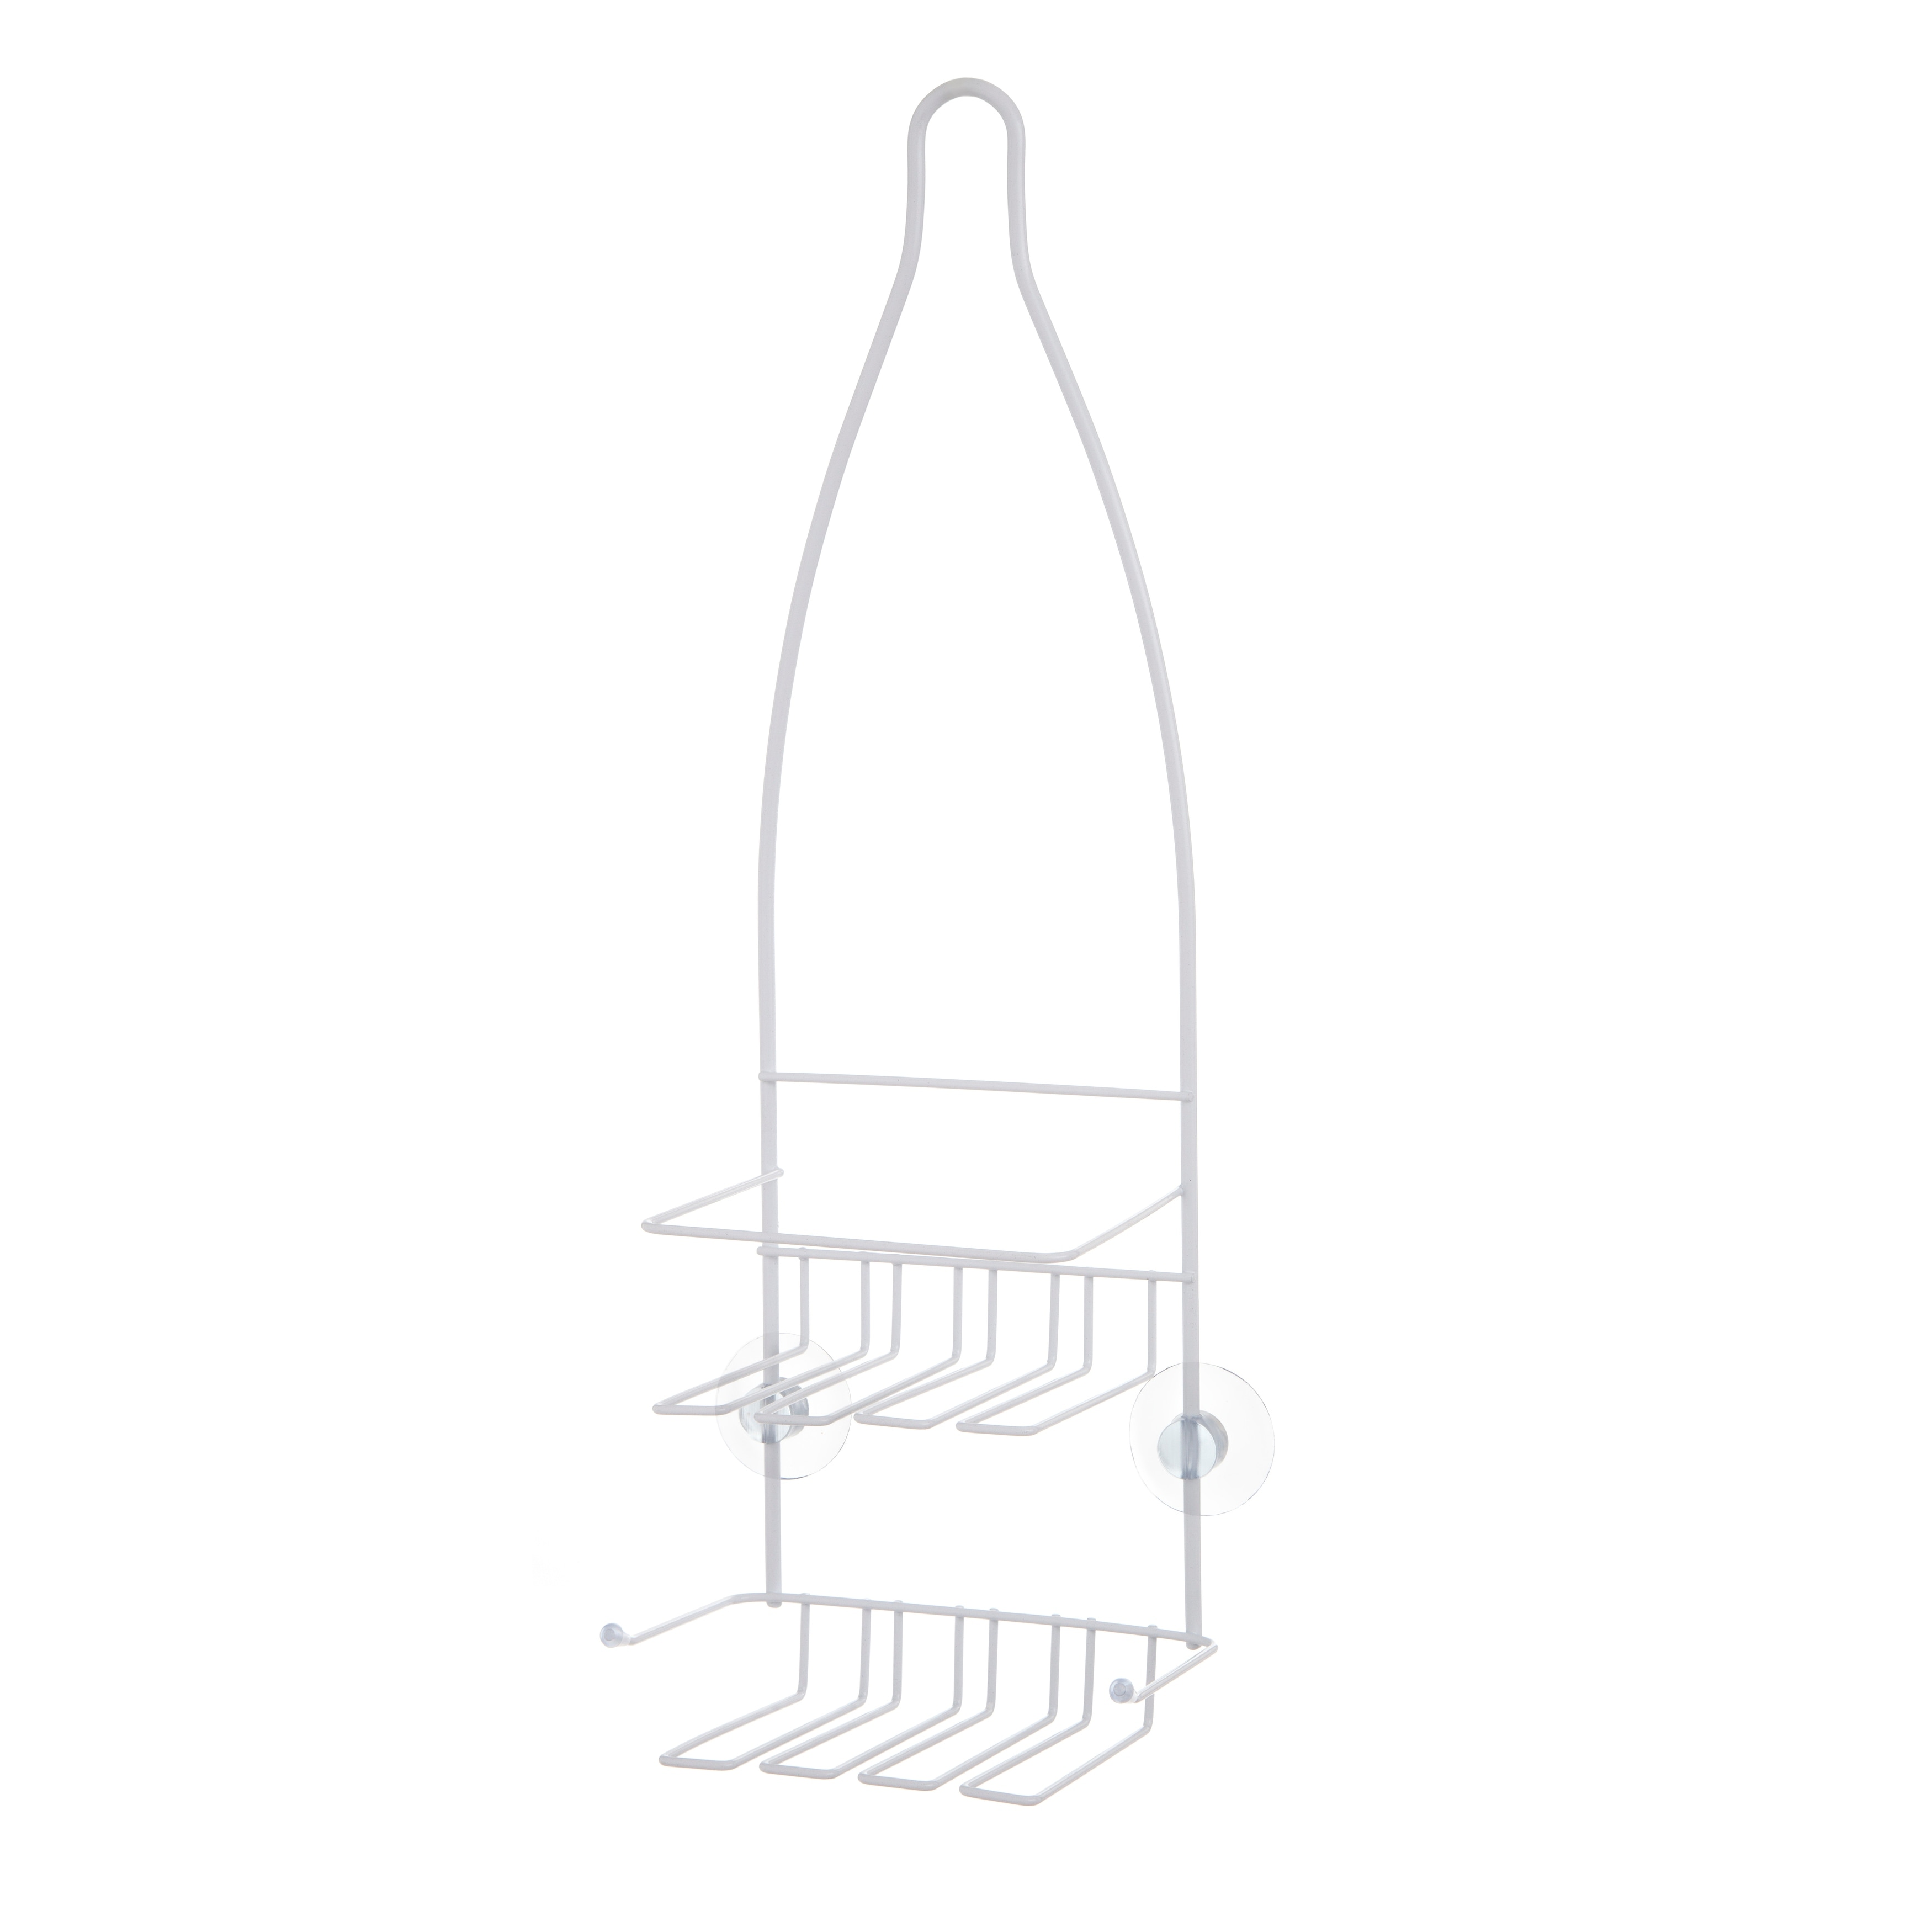 https://ak1.ostkcdn.com/images/products/is/images/direct/fa9400f0b68a13c36c69e6b0559a550a3f225122/Kenney-Rust-Resistant-2-Tier-Small-Hanging-Shower-Caddy-with-Suction-Cups.jpg